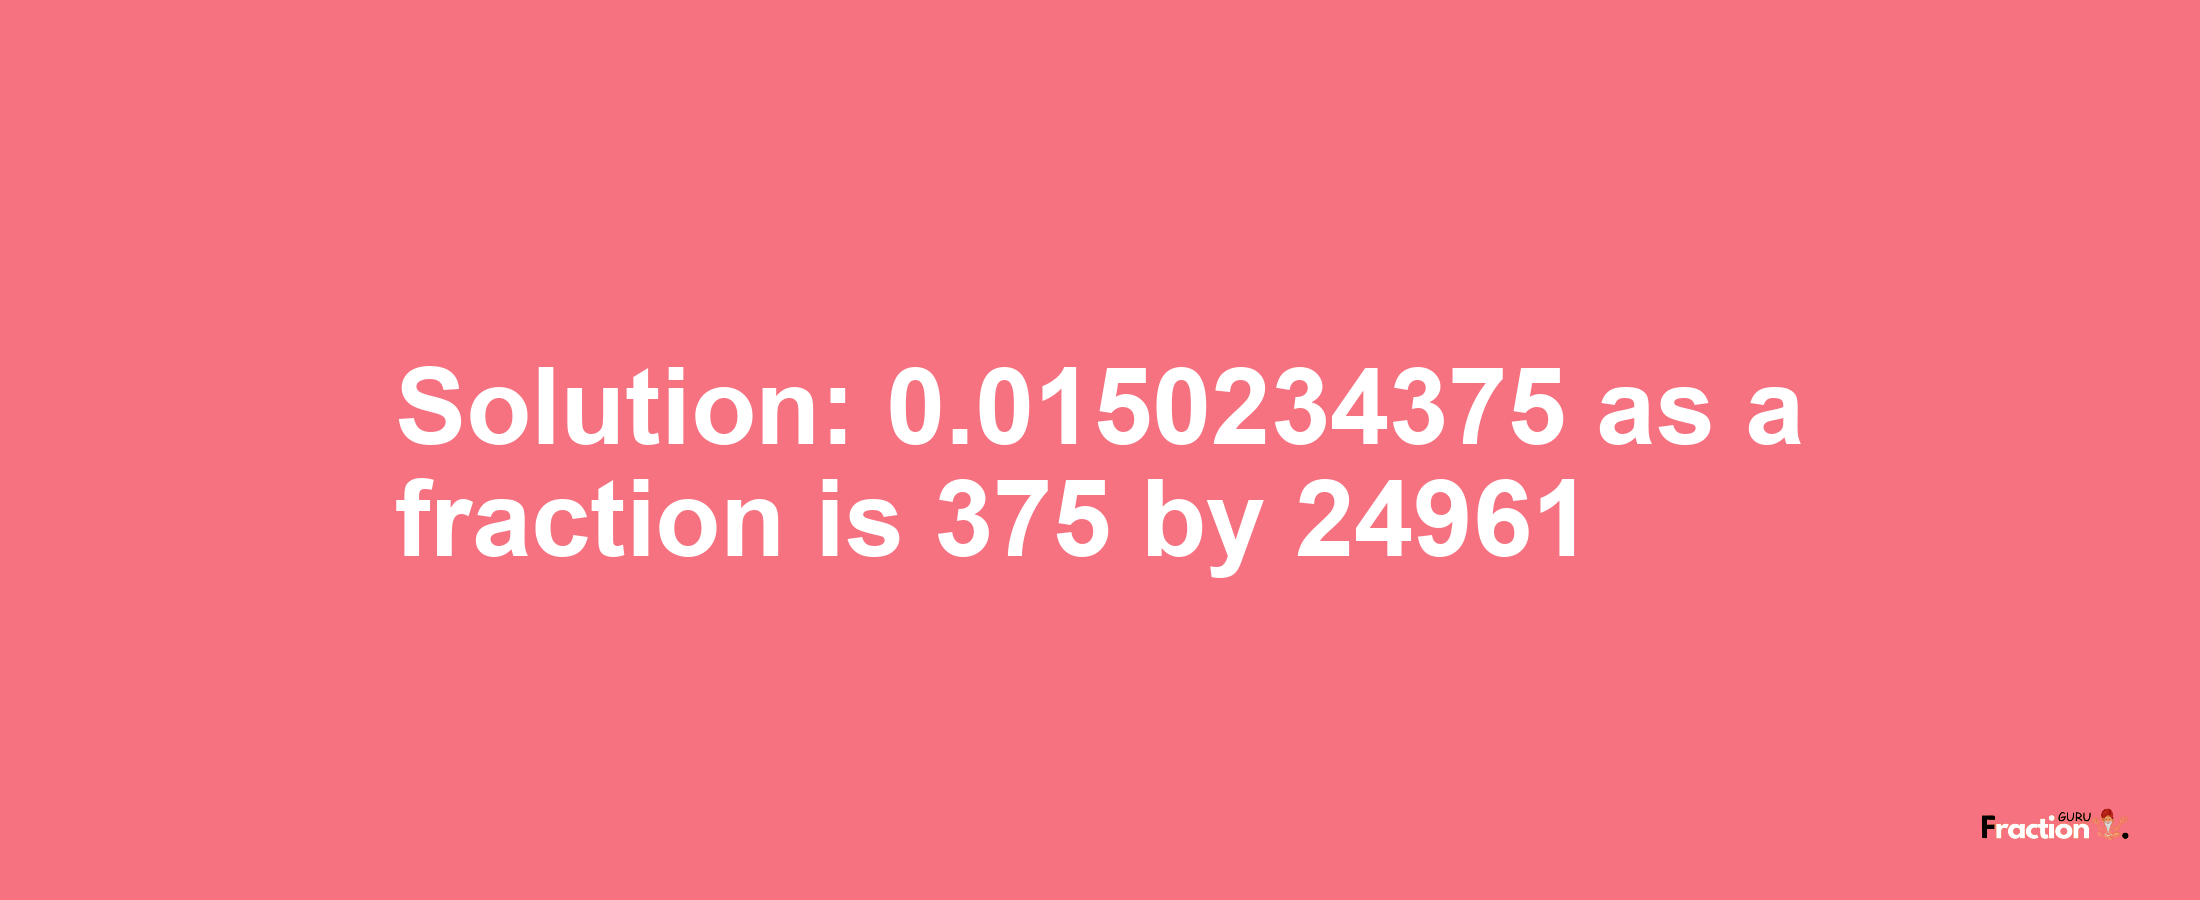 Solution:0.0150234375 as a fraction is 375/24961